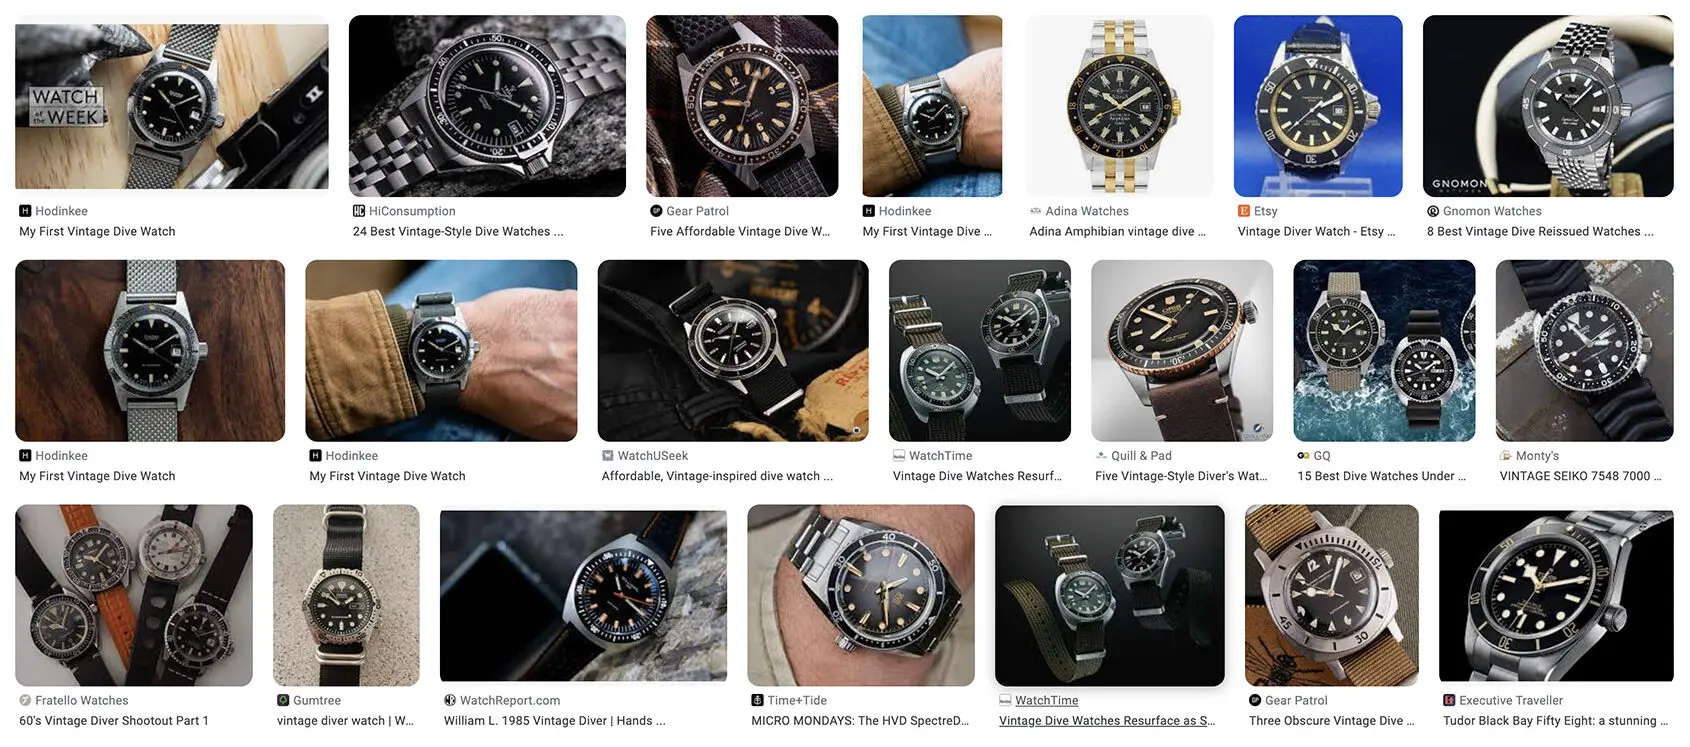 Watches Worn by Top CEOs: Elon Musk, CZ Zhao, Jeff Bezos, and More